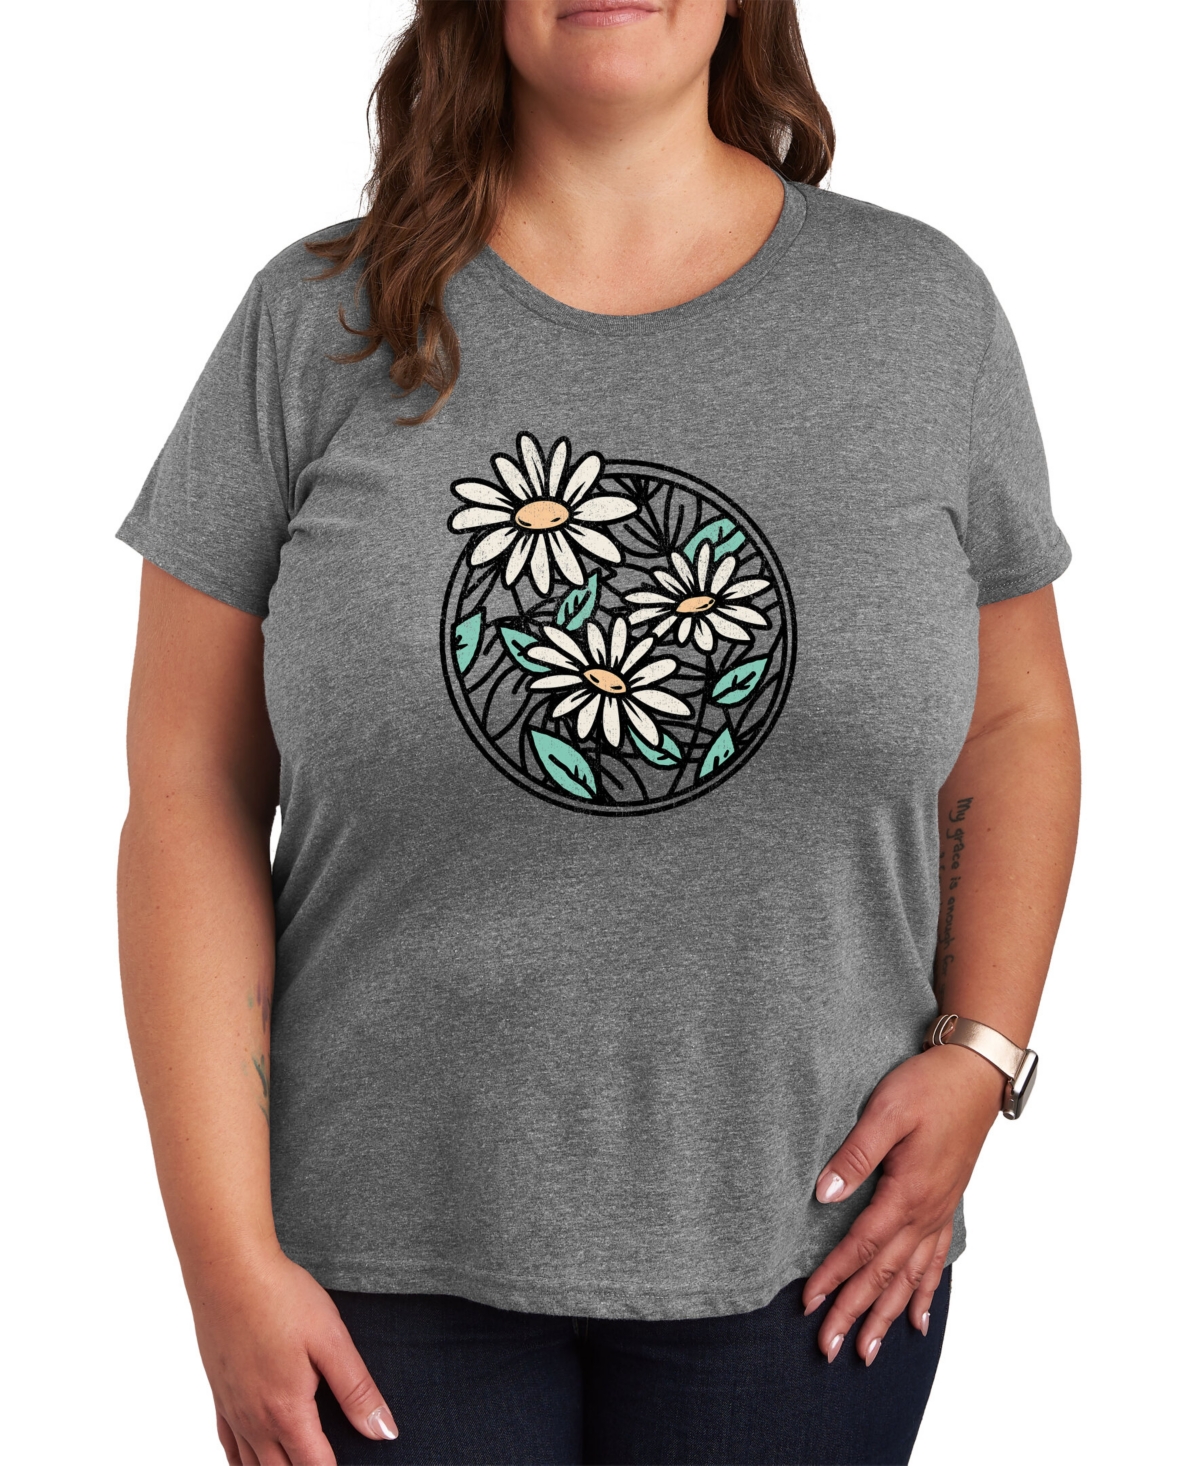 Air Waves Trendy Plus Size Daisy Graphic T-shirt - Gray